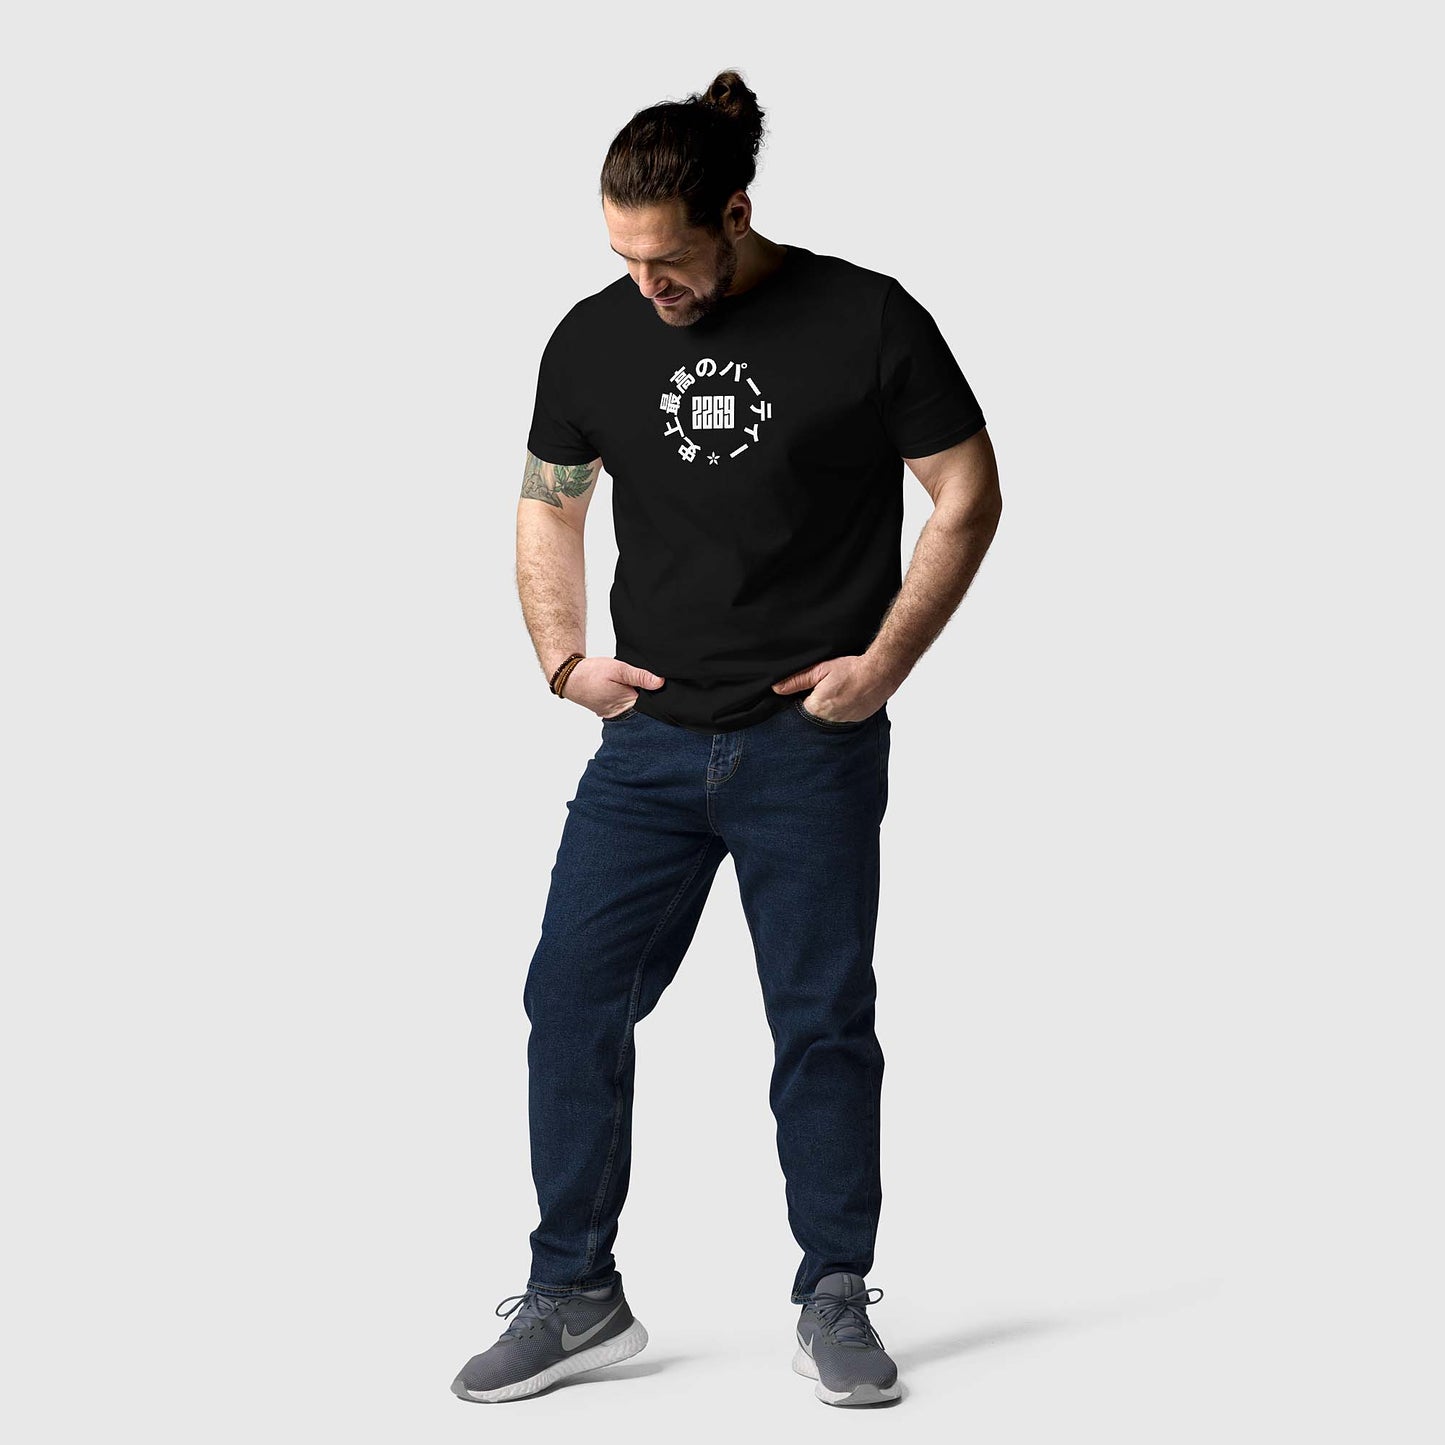 Men's black organic cotton t-shirt with Japanese 2269 party circle